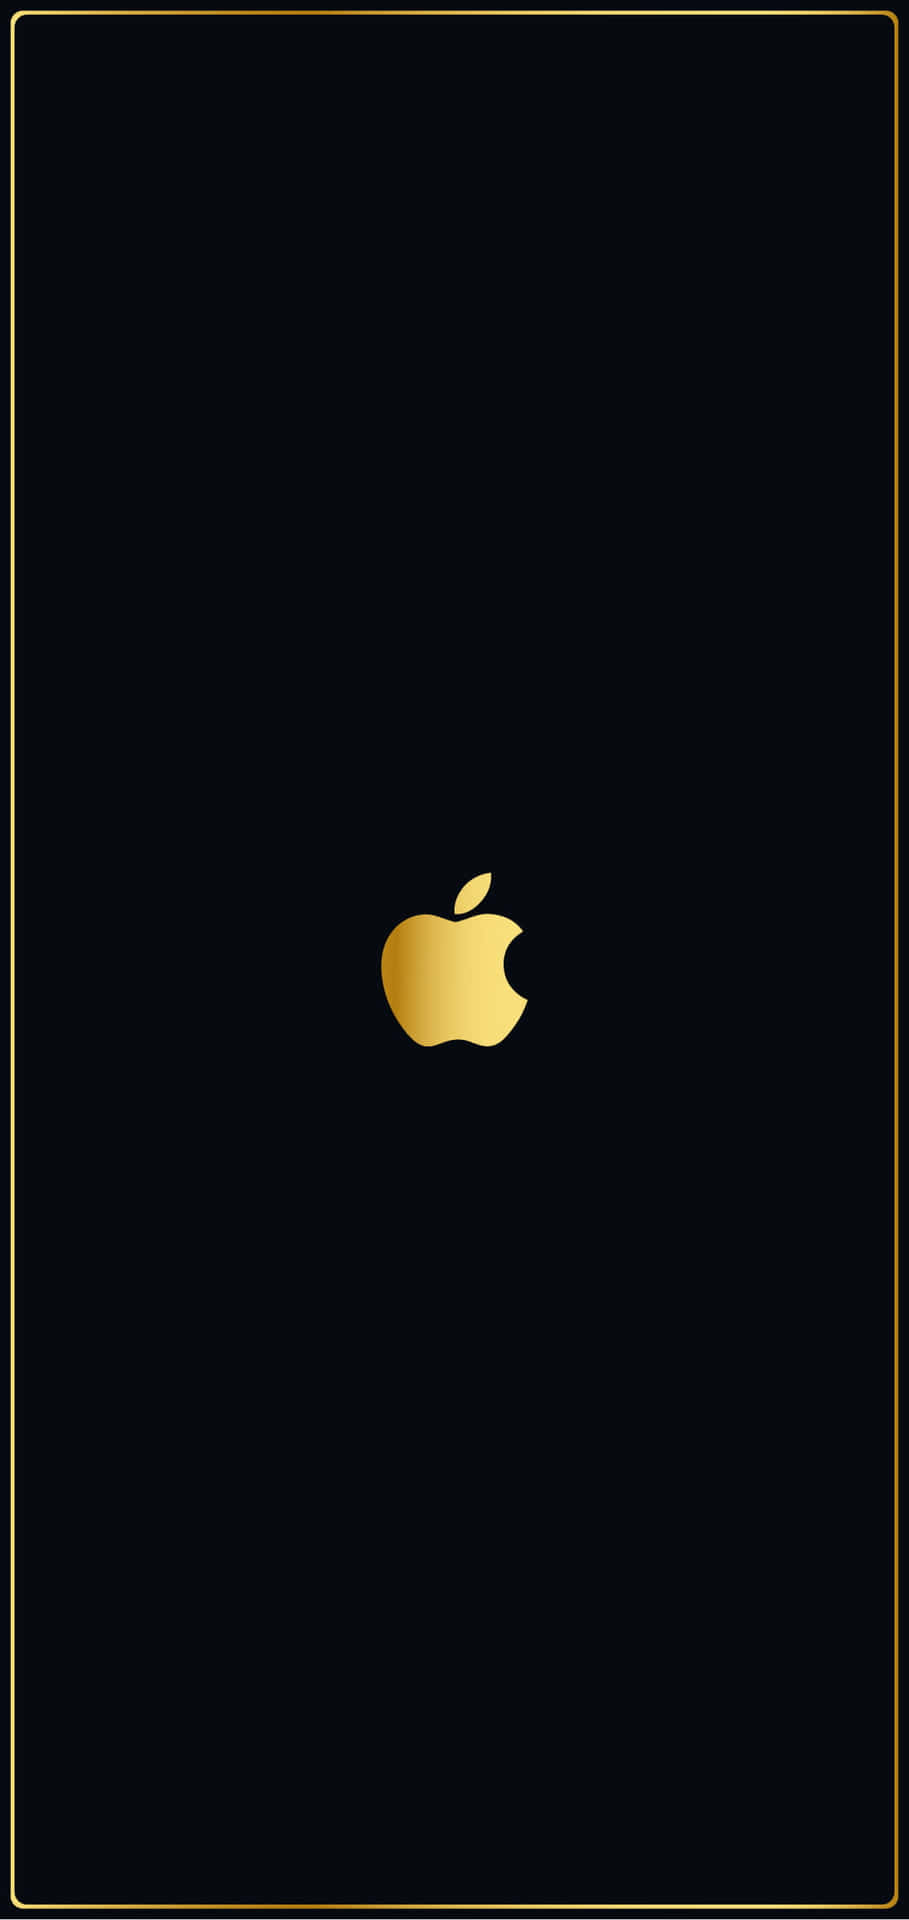 Apple Inc.'s Trademark Logo On A Colour Gradient Background